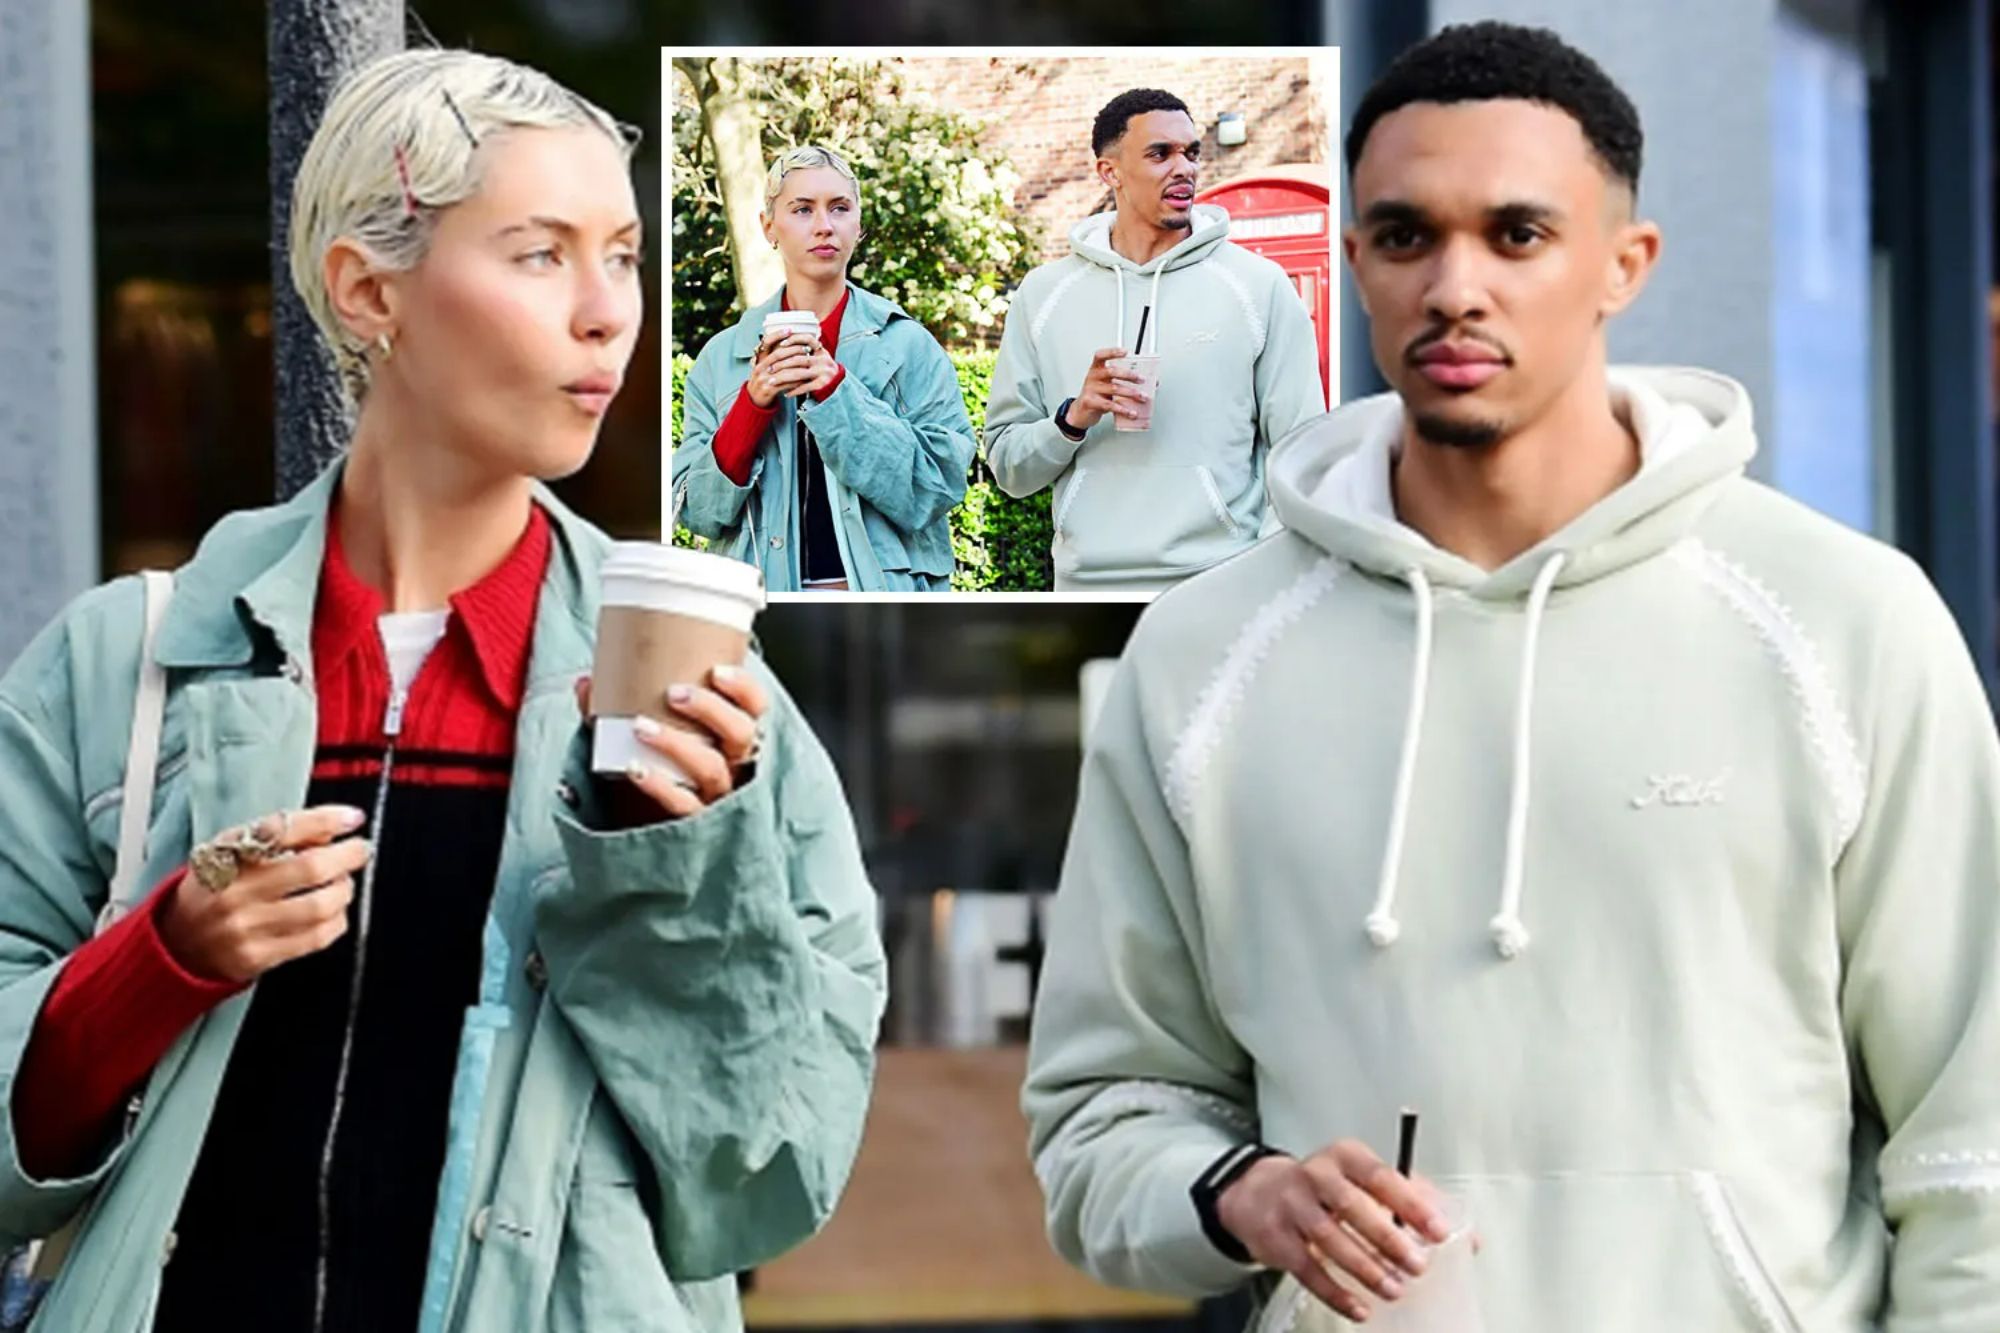 England's Alexander-Arnold spotted with movie star's daughter on London stroll